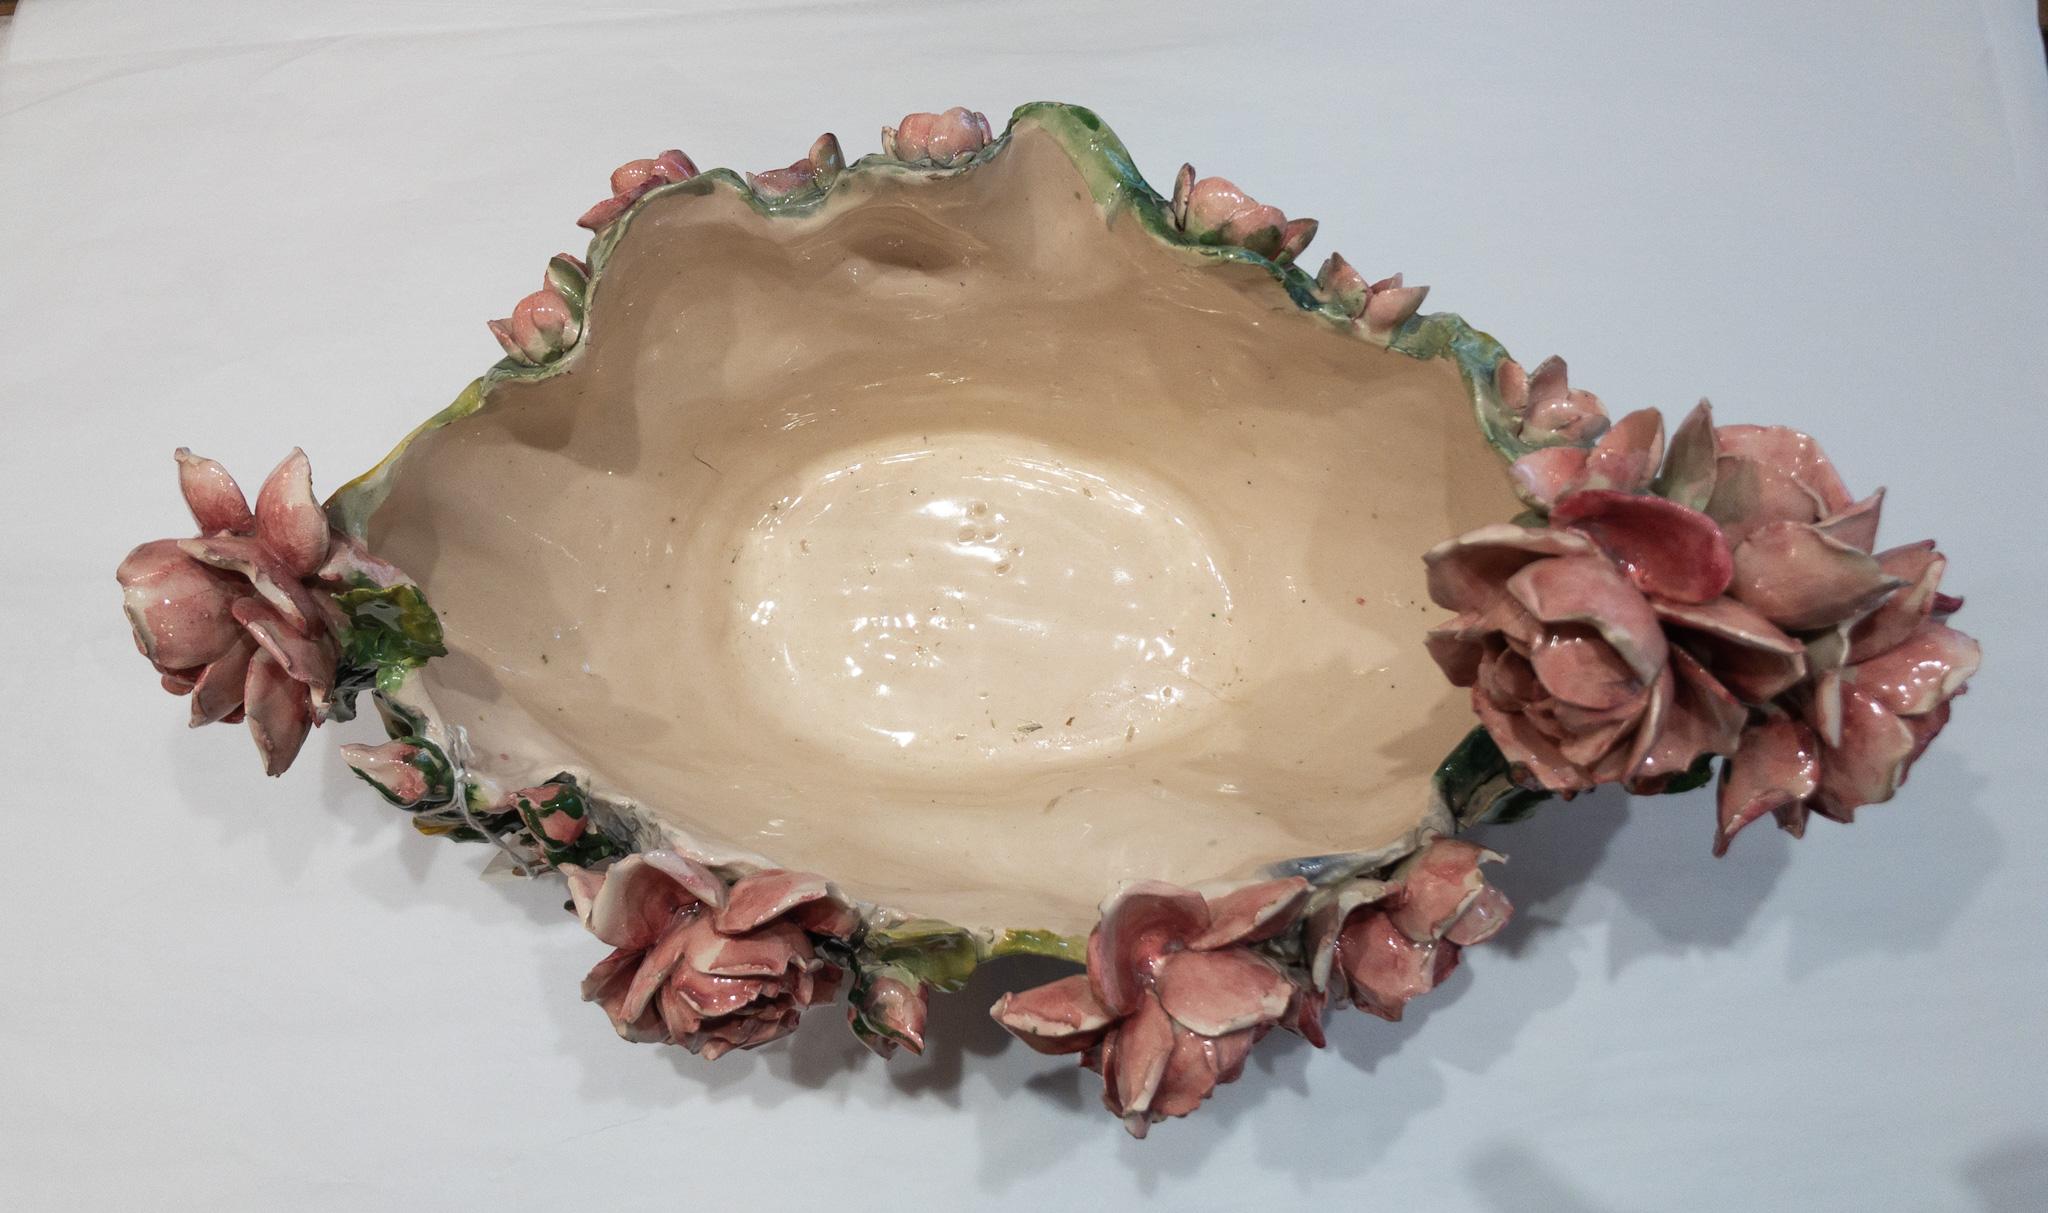 Hand-Crafted Estate Handmade French Porcelain Centerpiece with Floral Motif